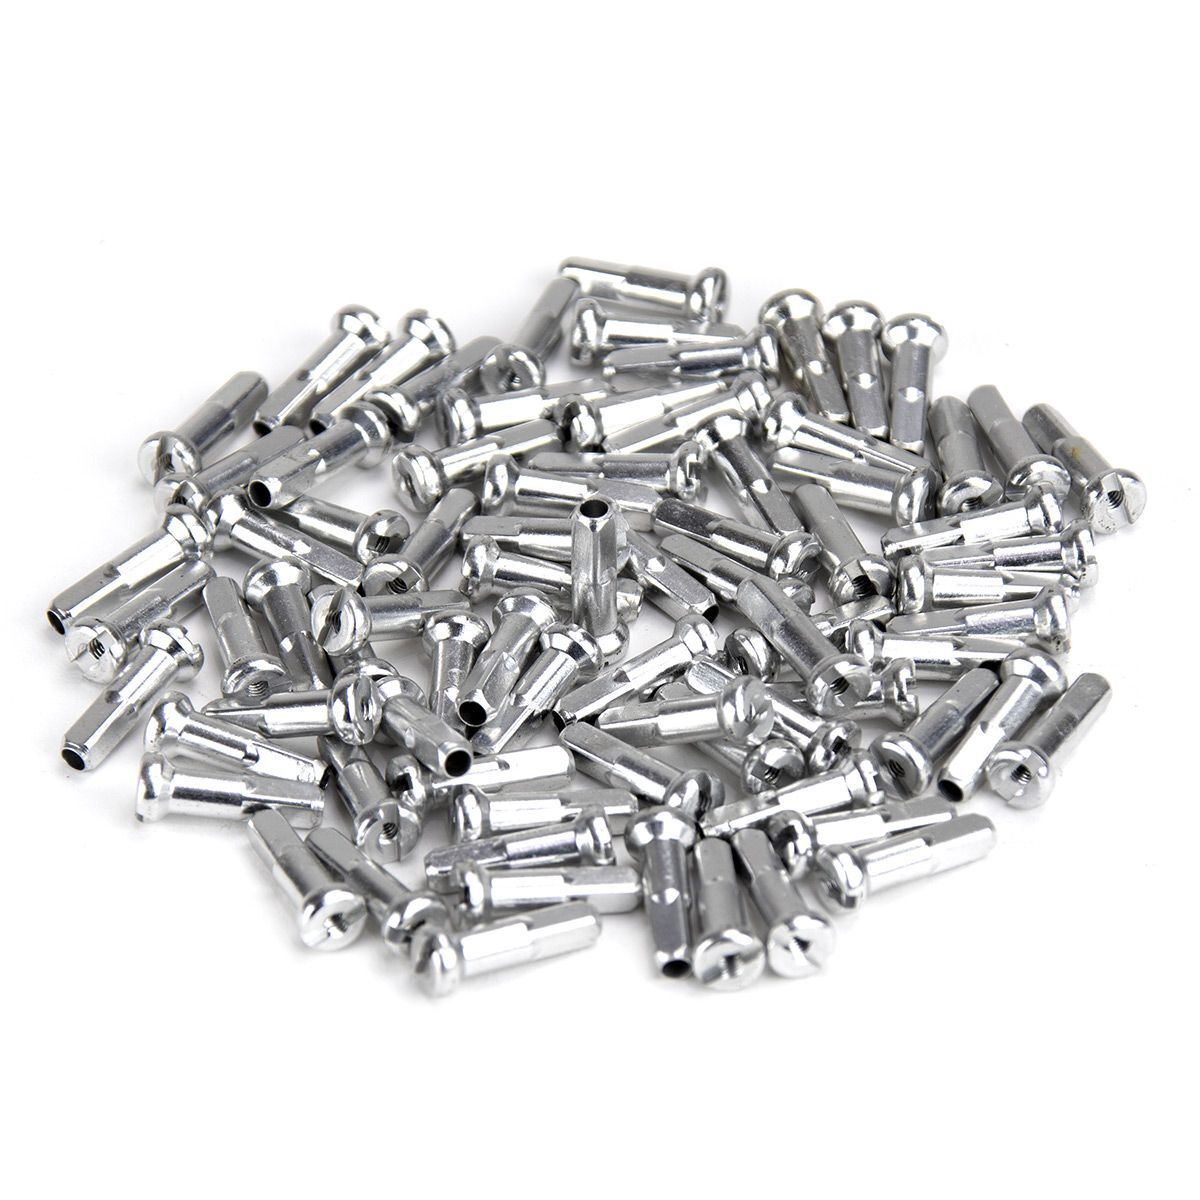 A pack of 80 Excess Alloy Nipples, each 16mm in length, on a white background.